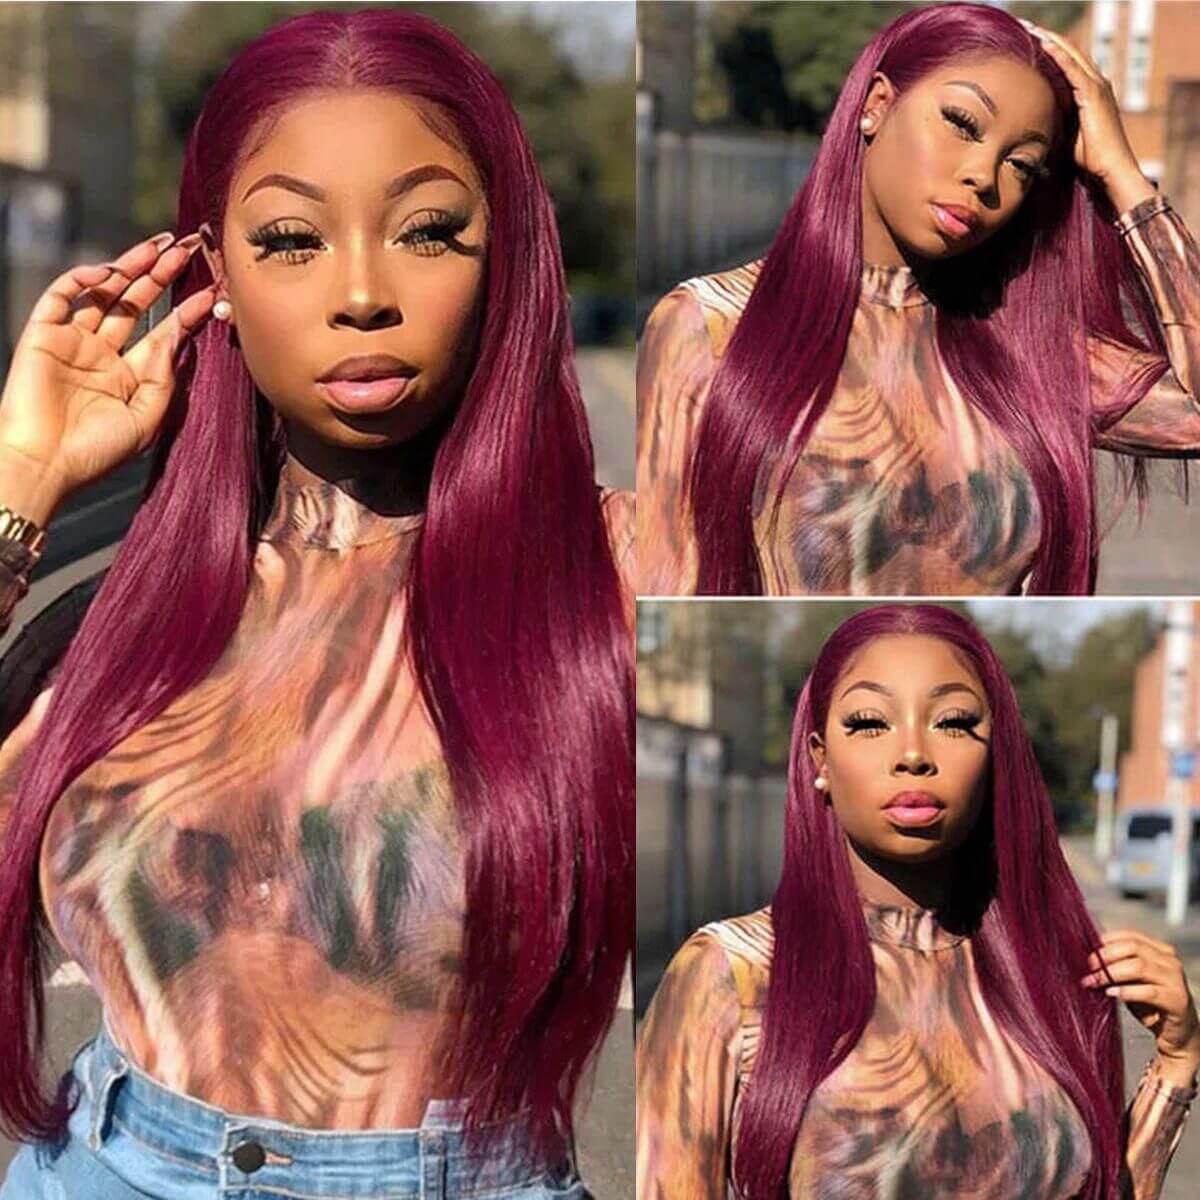 99j lace wig,burgundy color lace wig,straight hair 99j lace wigs,straight hair 99j 5*5 wig,best lace wigs,cheap lace wigs,99j lace straight hair wigs